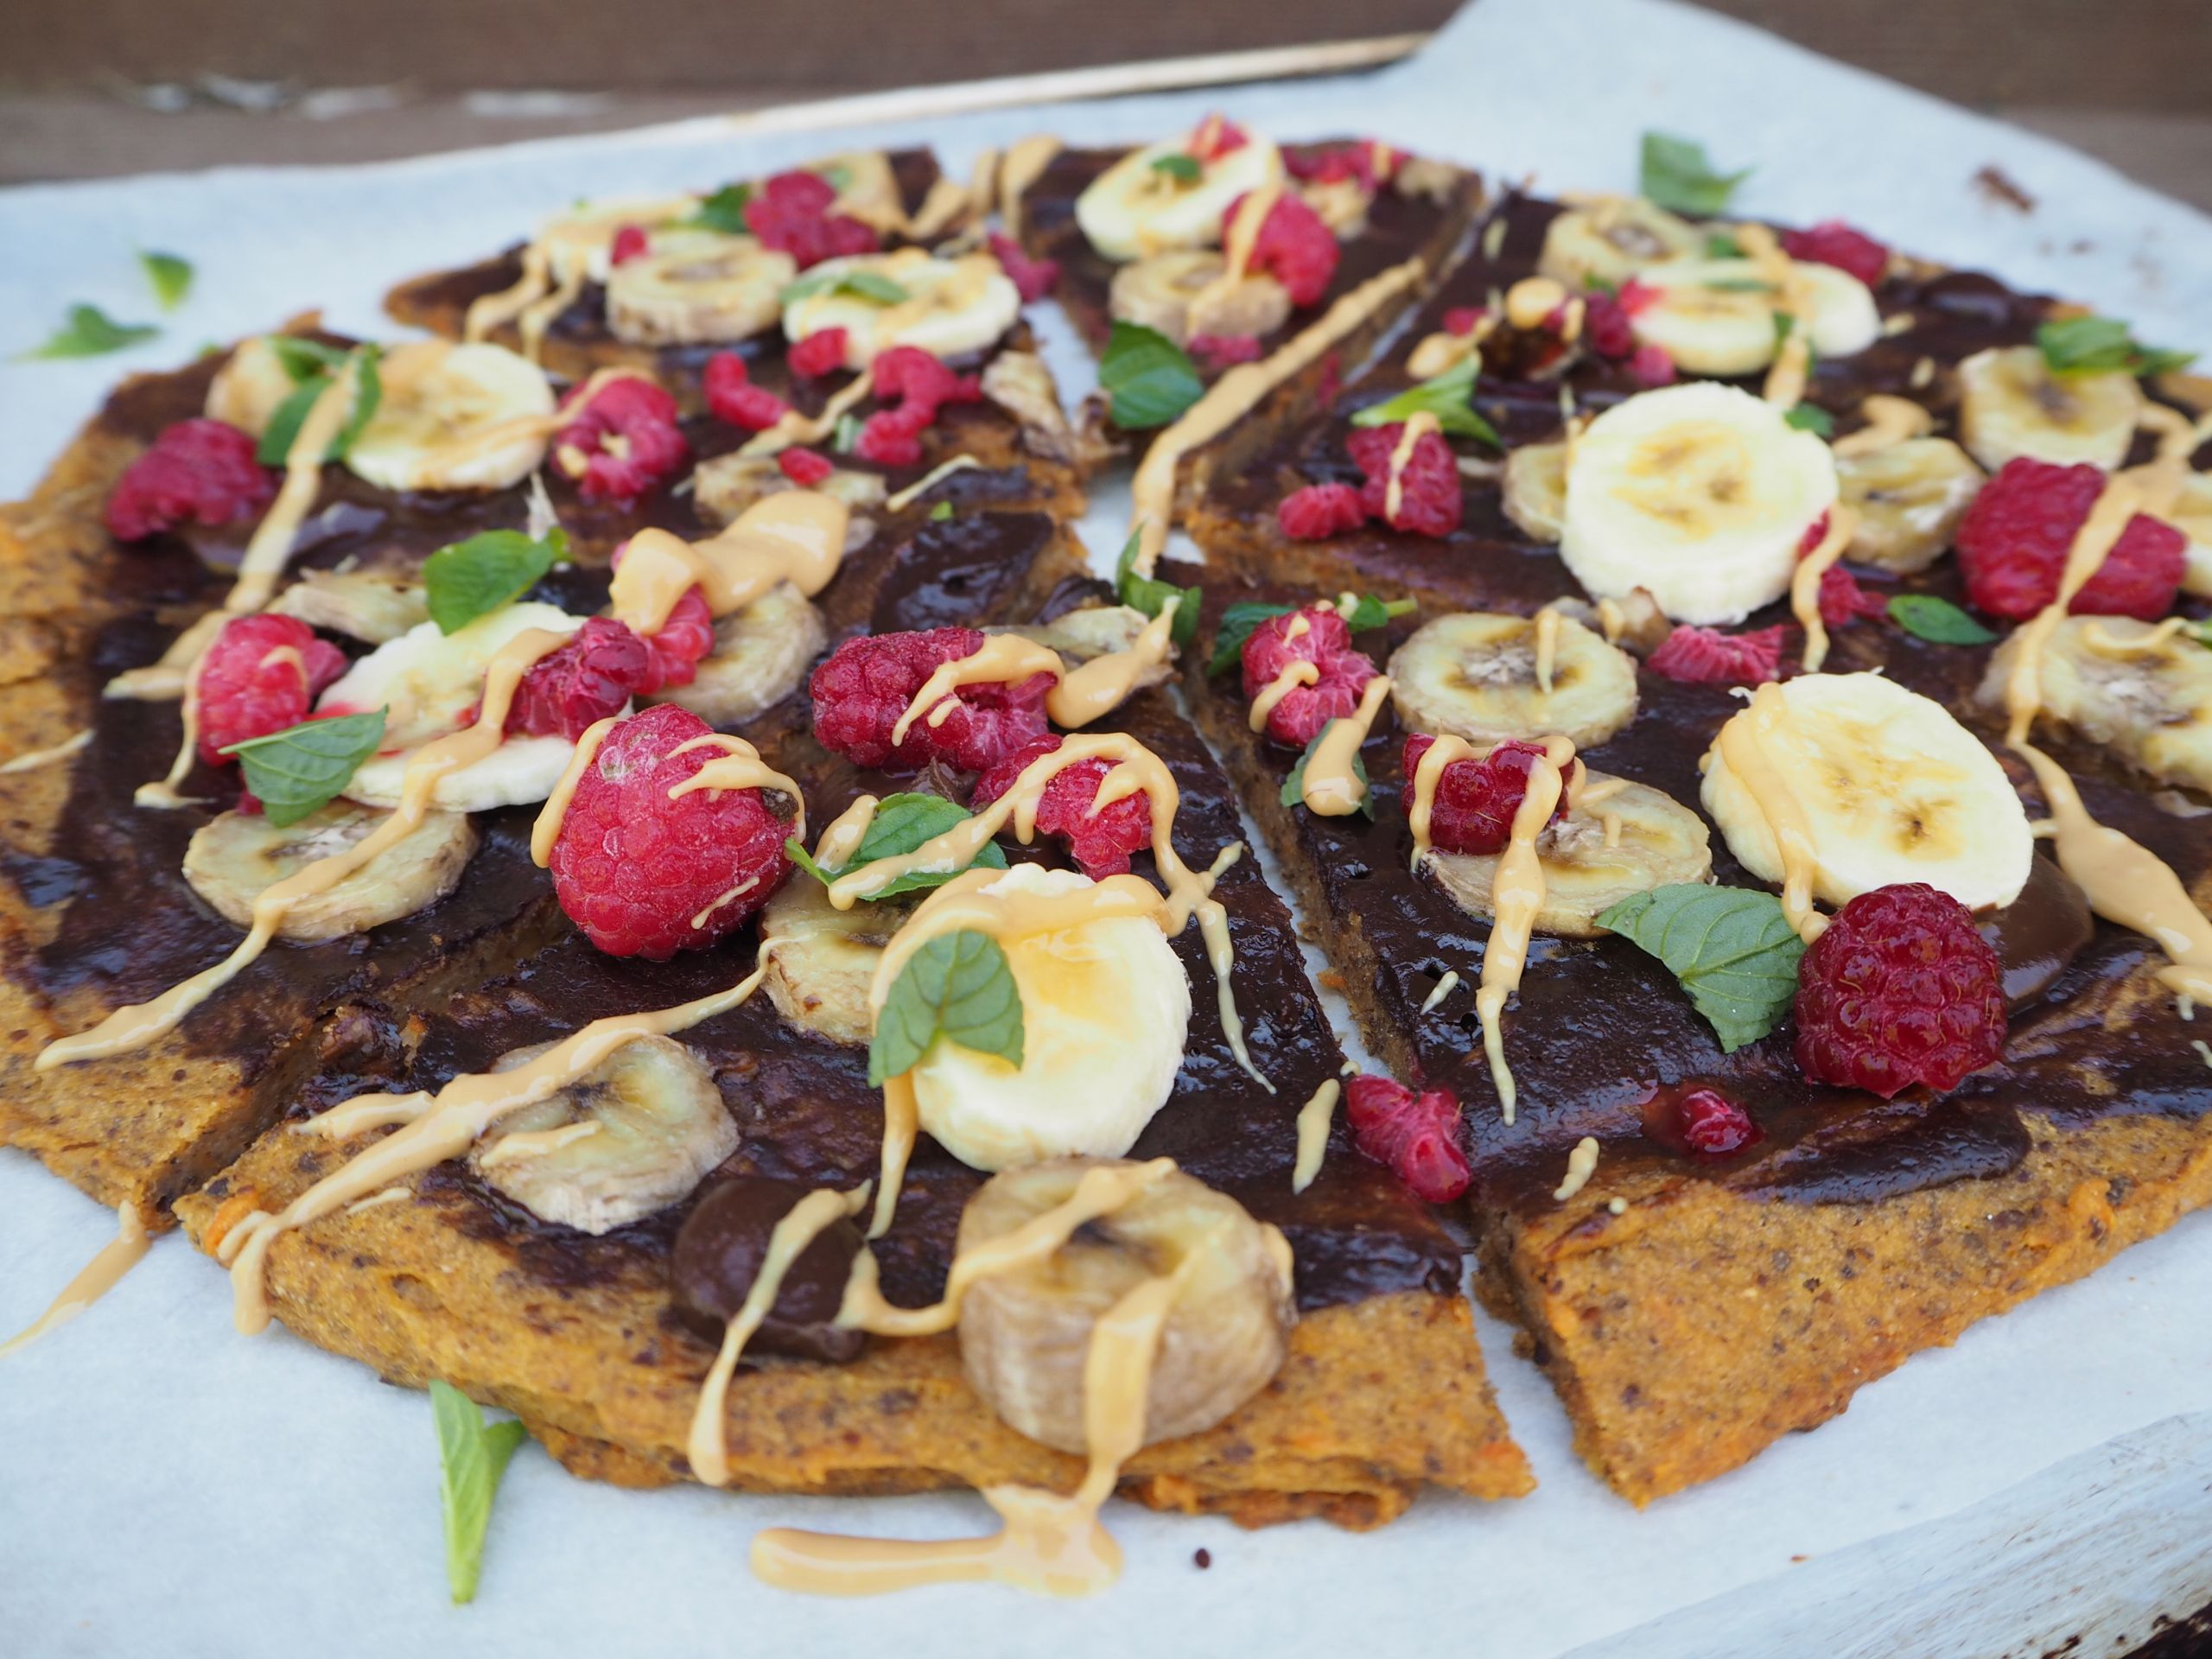 Desserts To Make With Pizza Dough
 Fruity choc dessert pizza with sweet potato crust